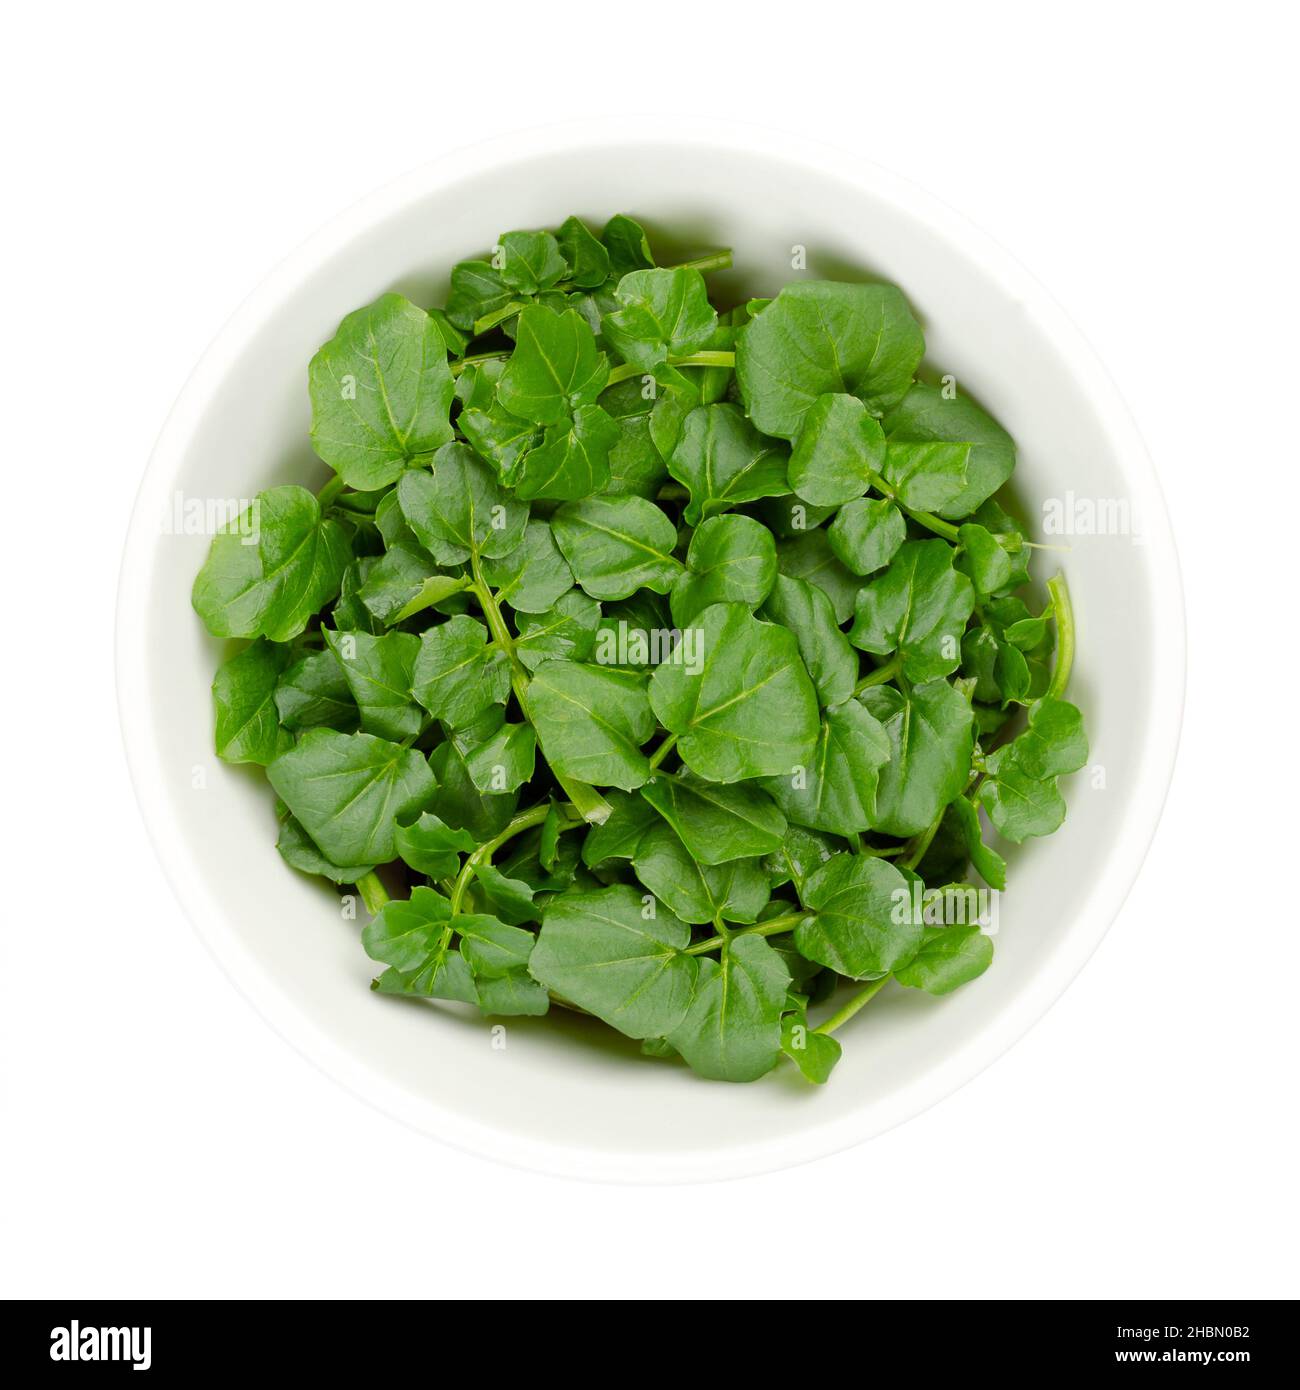 Watercress leaves, in a white bowl. Fresh yellowcress, Nasturtium officinale. Leaf vegetable with piquant flavor. Aquatic vegetable or herb. Stock Photo